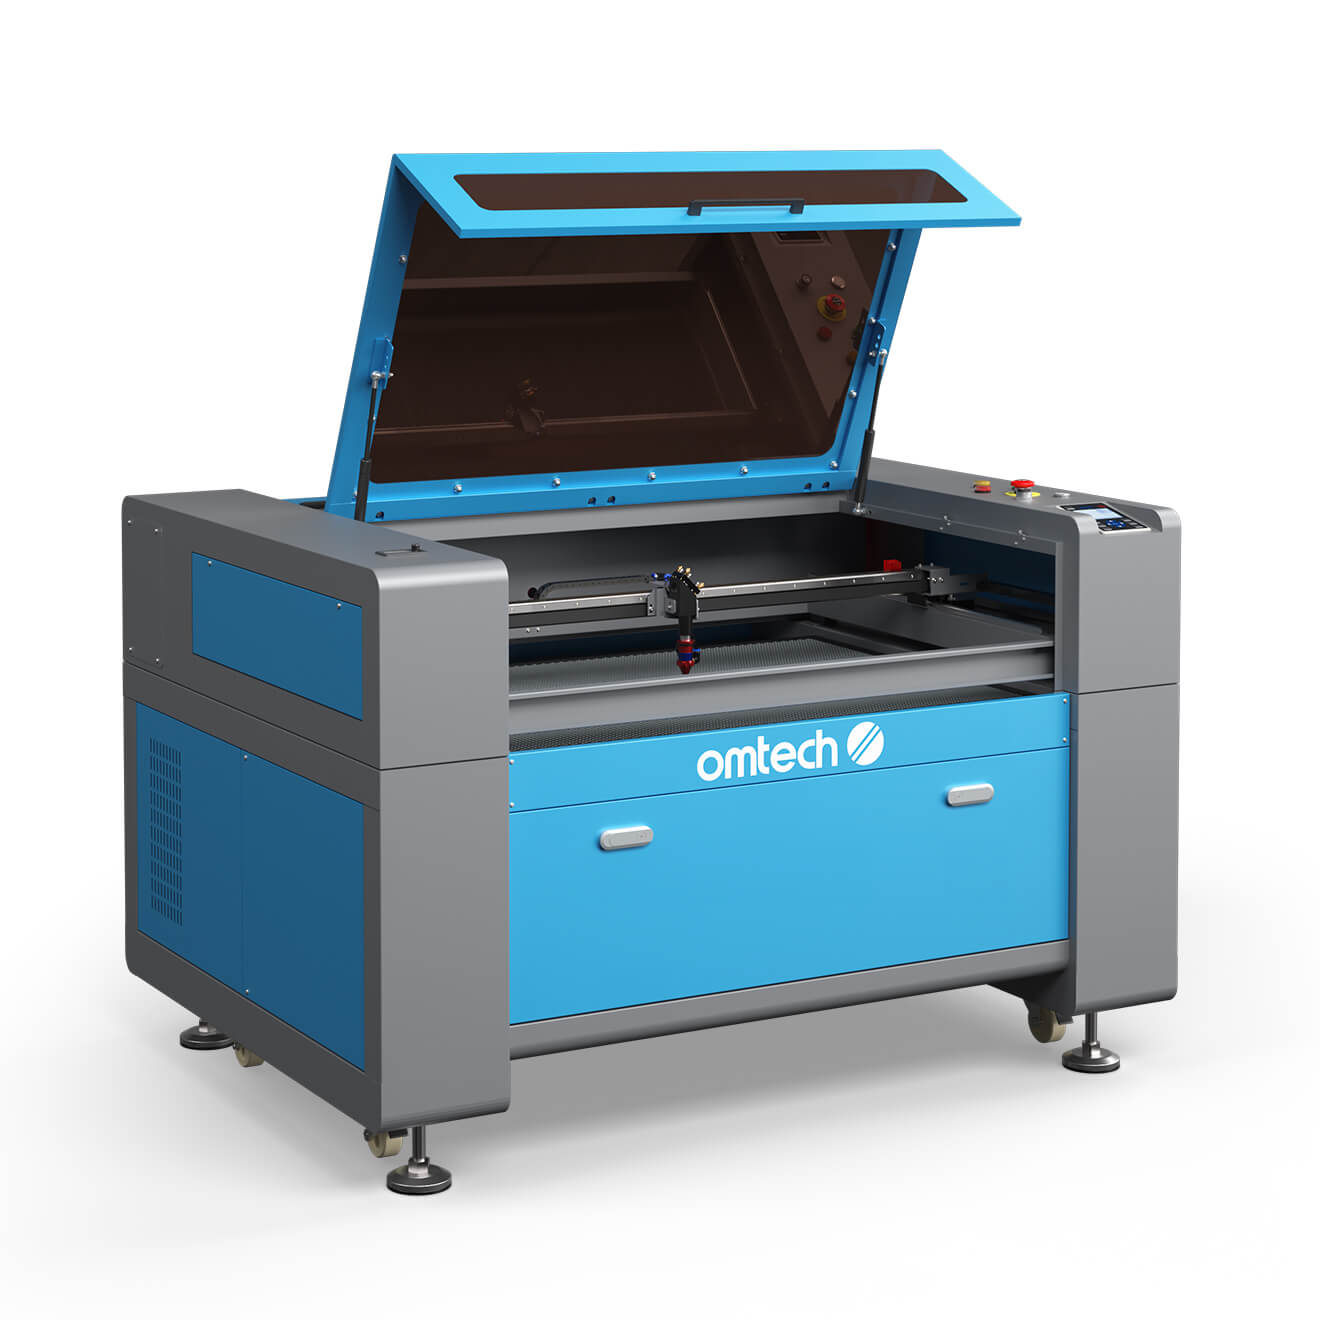 80W CO2 Laser Engraving Machine & Cutter with 900x600mm Engraving Area | Turbo-968